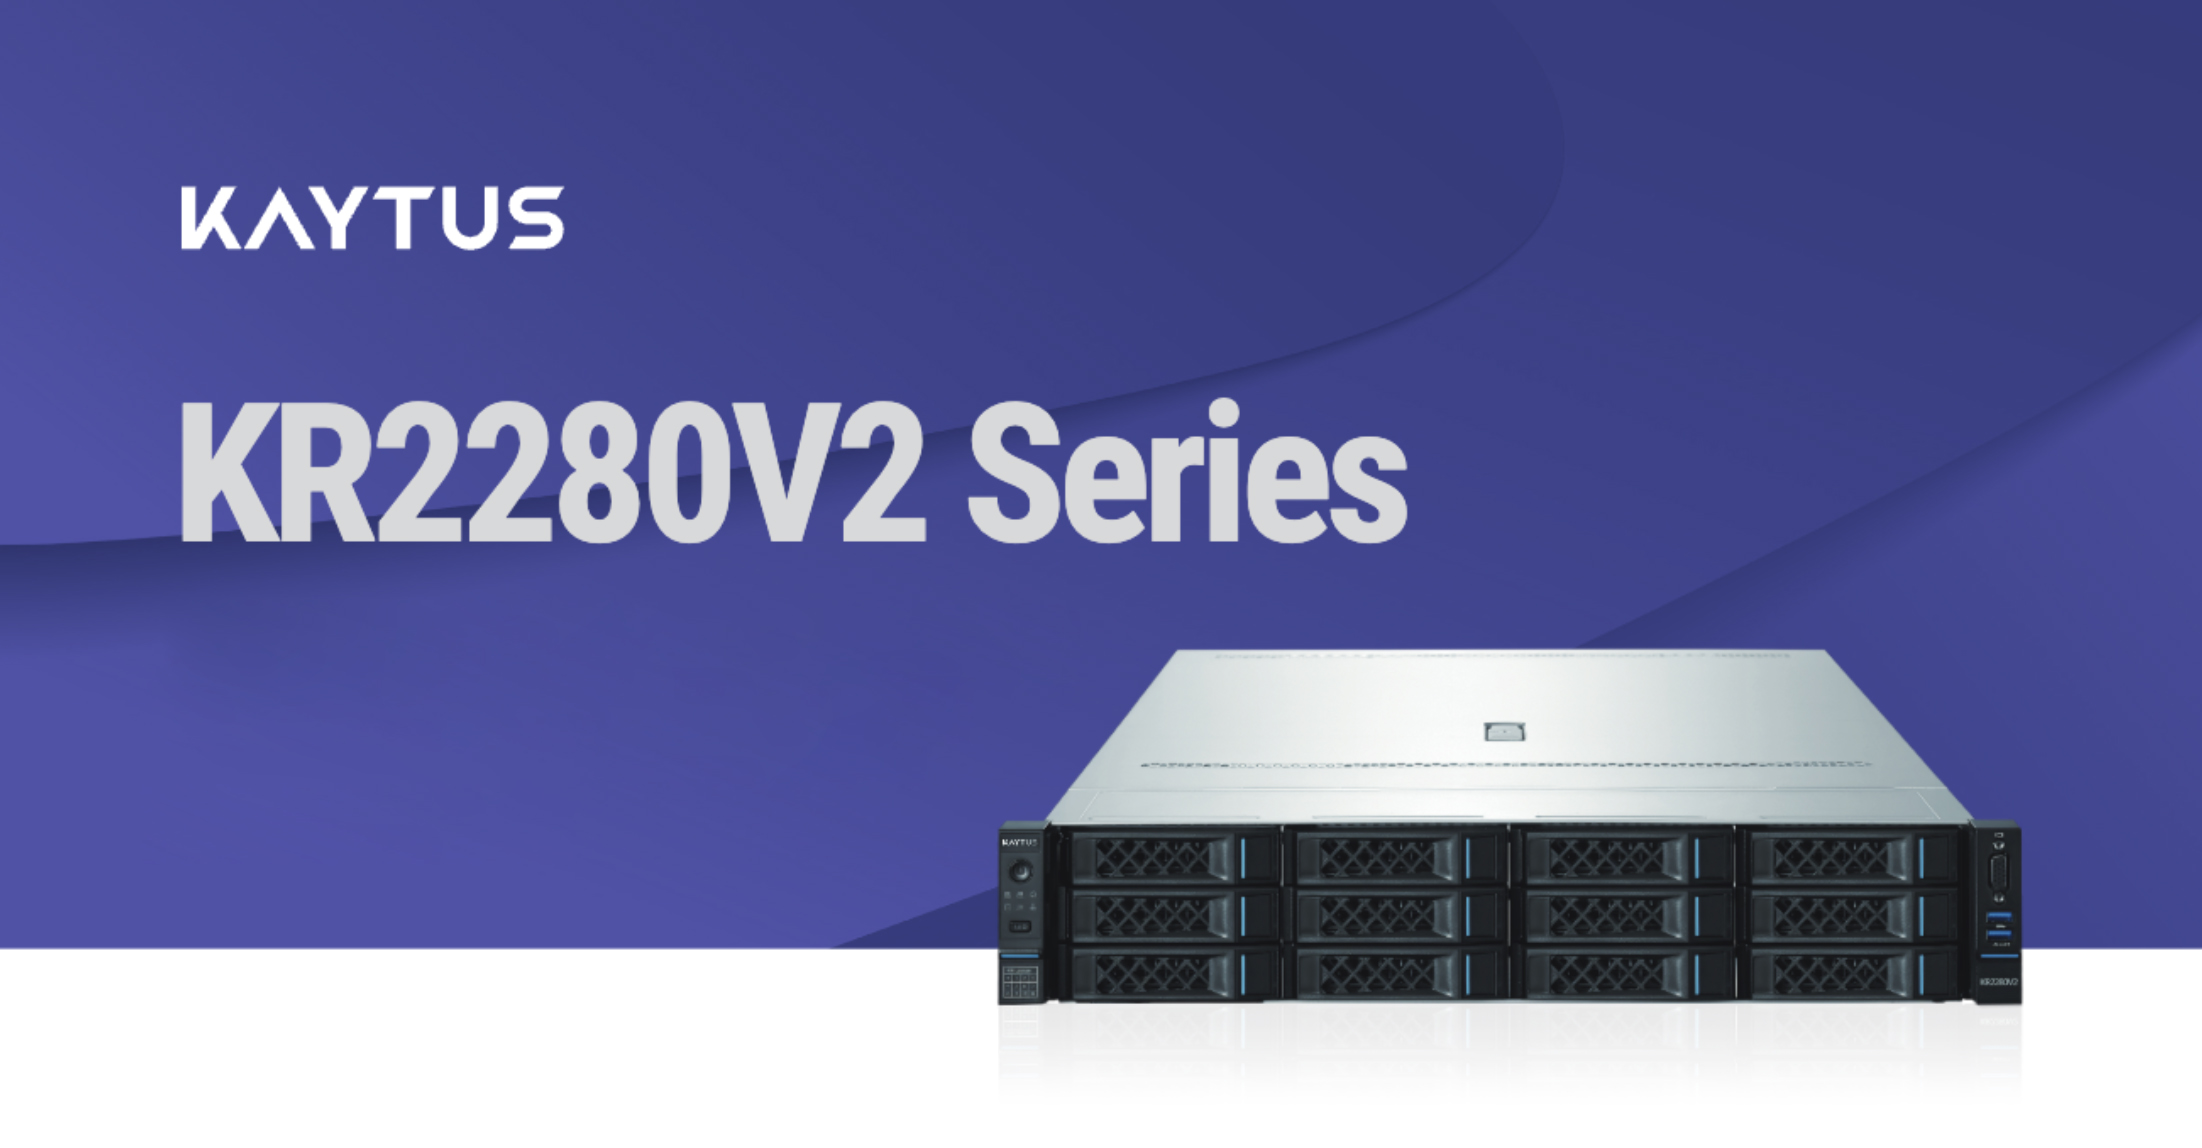 KR2280V2, the First to Support Three Processor Platforms in One Server